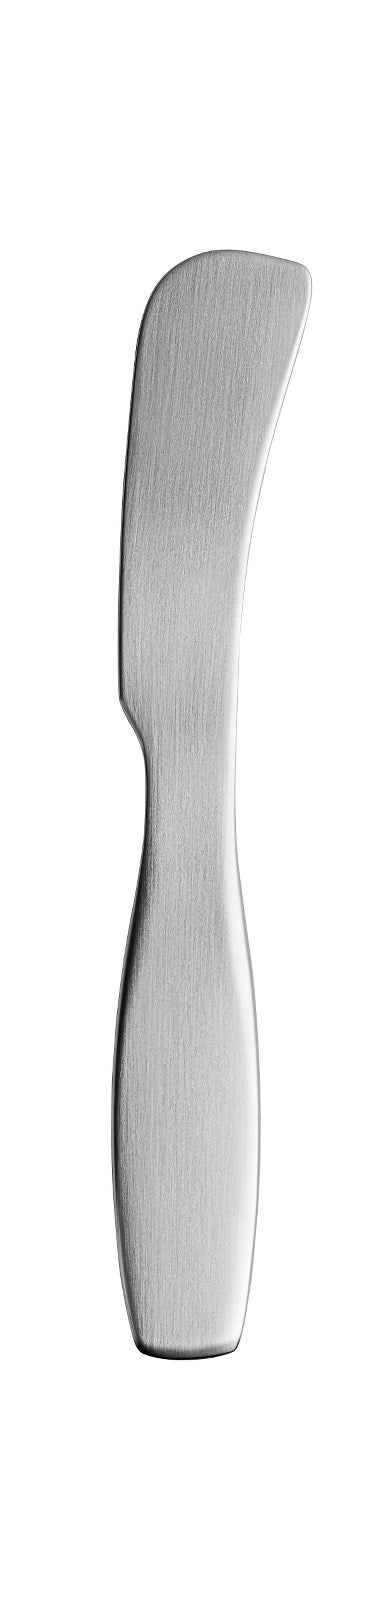 product image for Collective Tools Flatware design by Antonio Citterio for Iittala 53